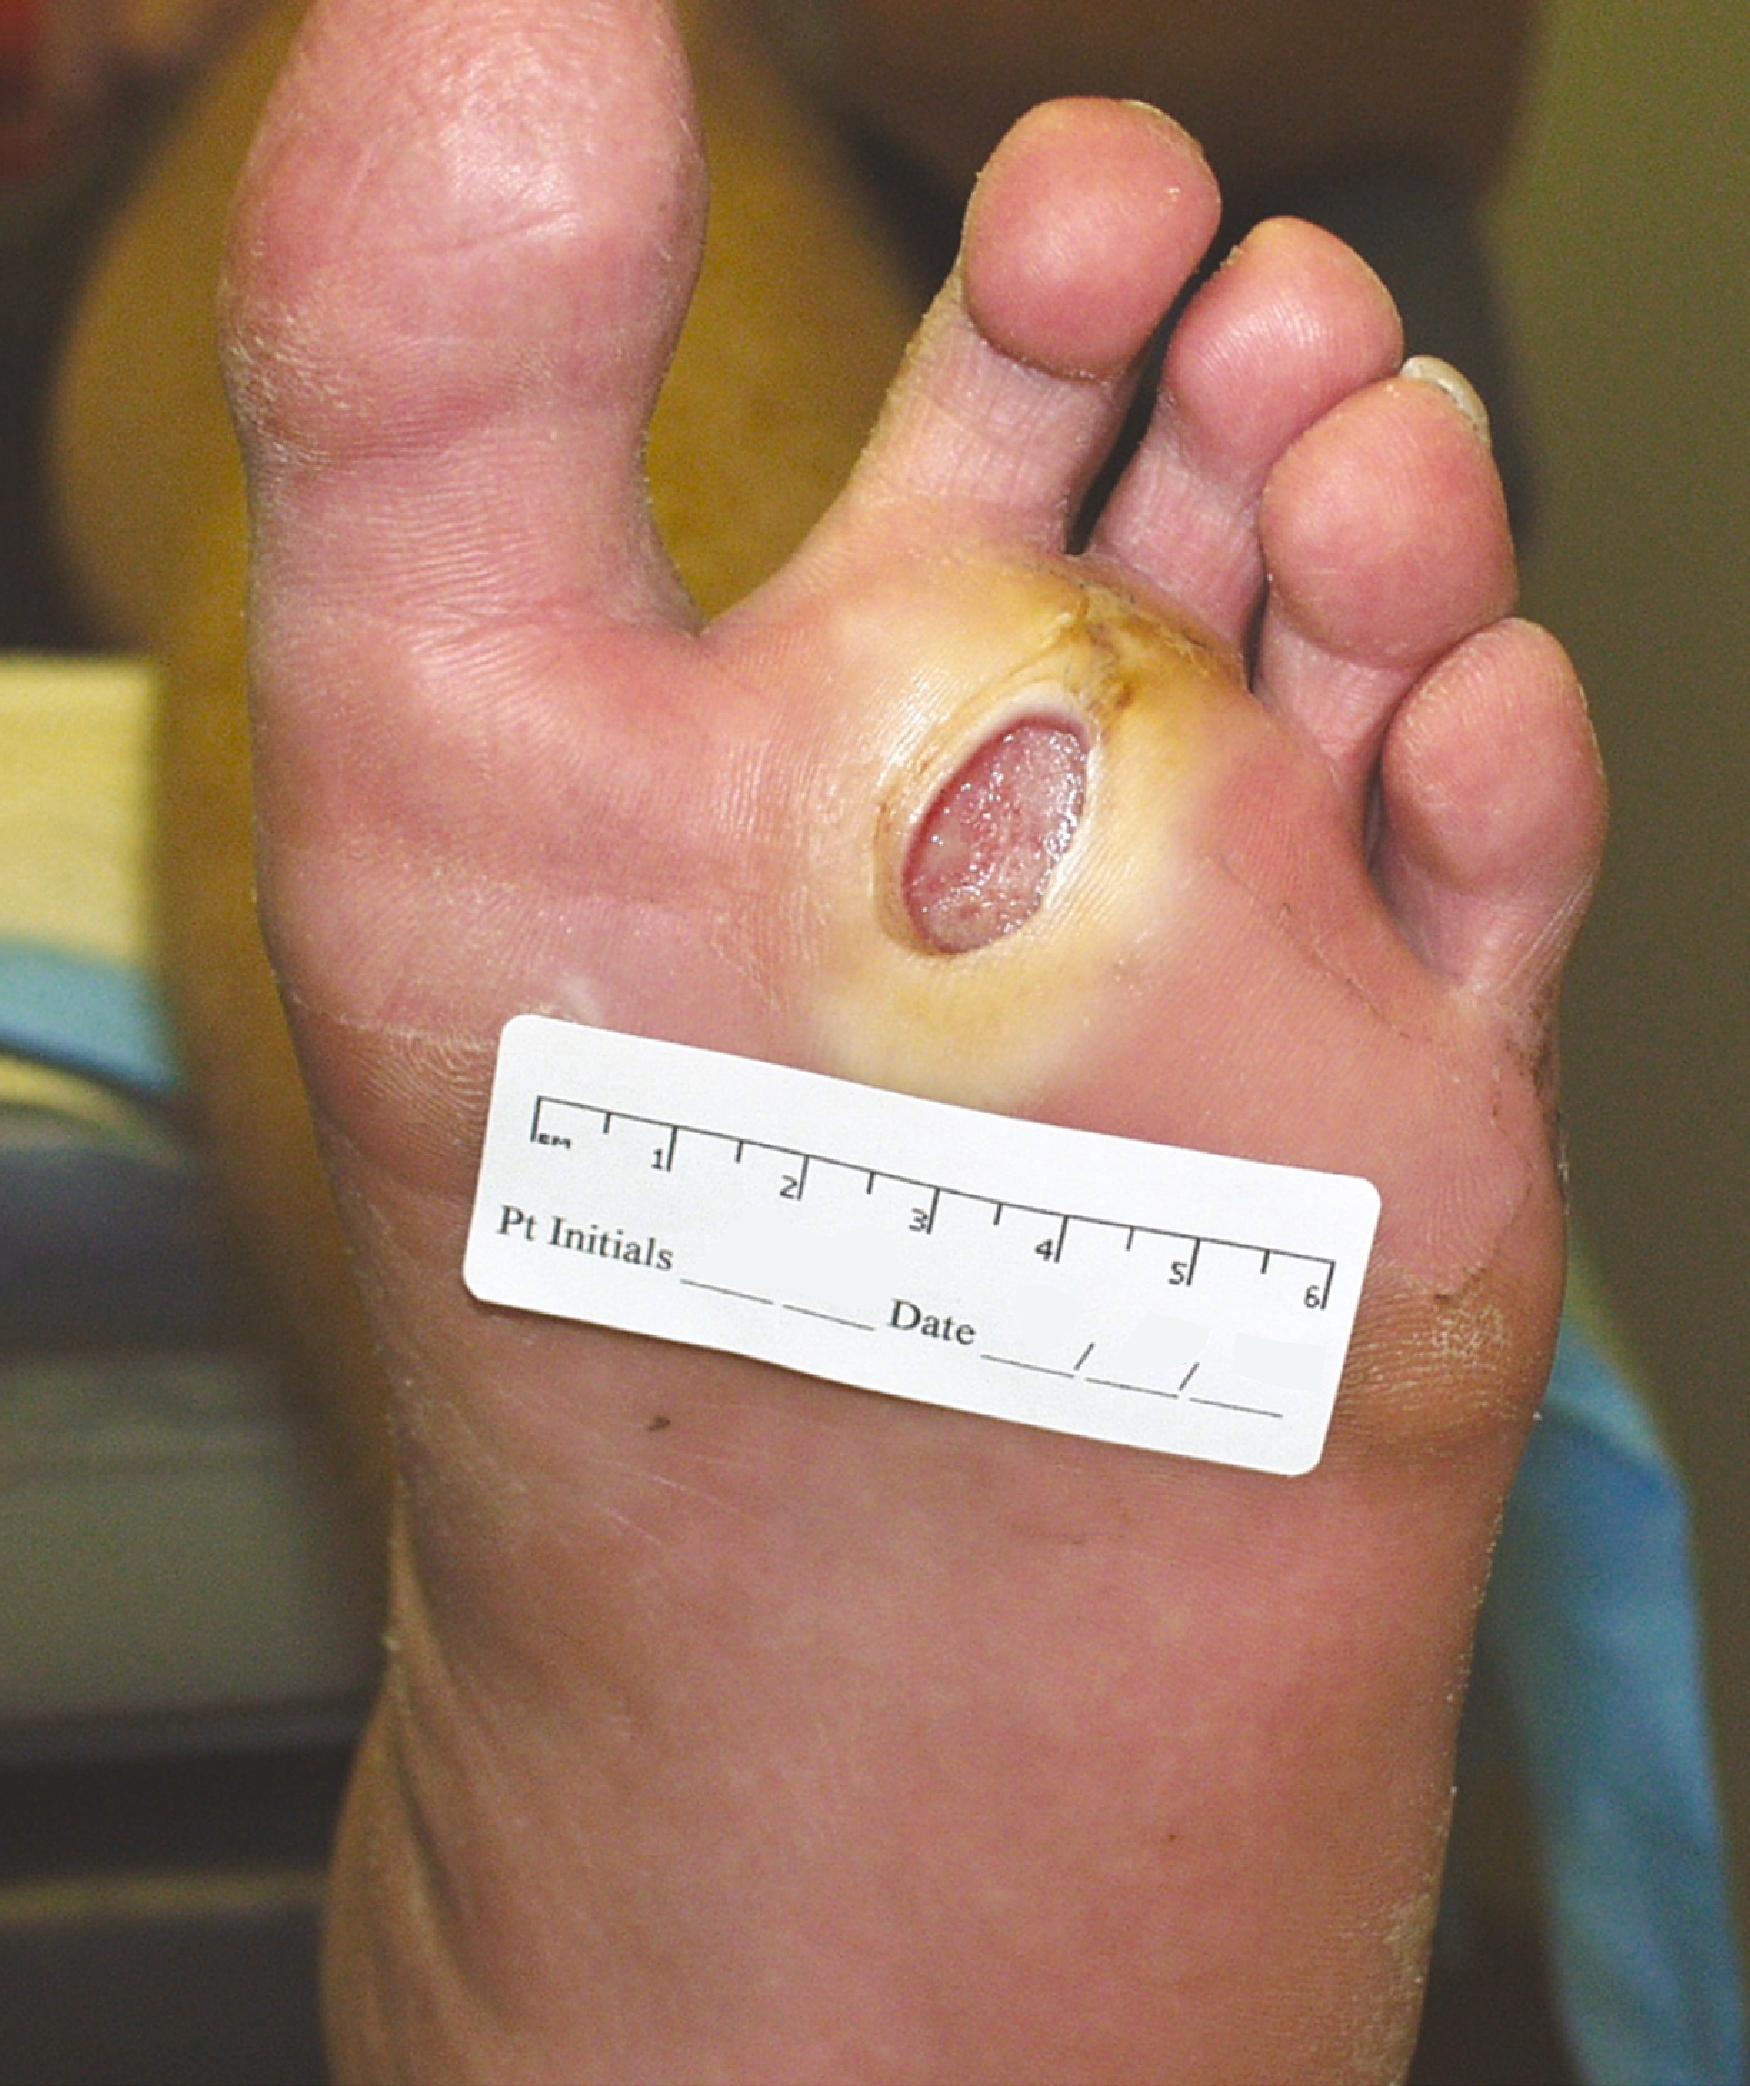 Figure 118.2, Wagner grade 1 diabetic foot ulcer. The wound penetrates through the full thickness of the skin, involving the subcutaneous tissue but not the deeper tissue layers.